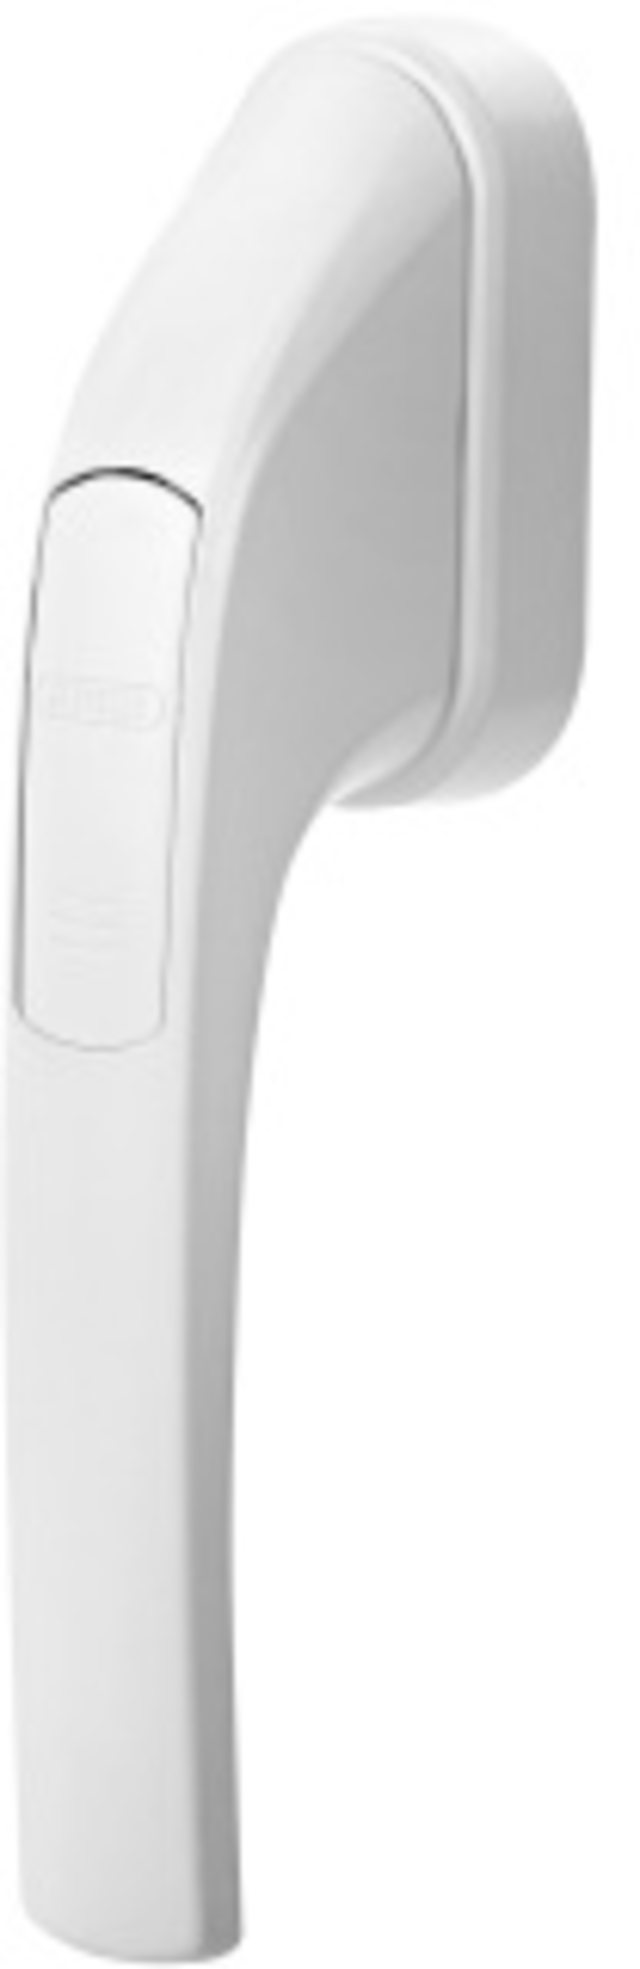 Secvest 2WAY FG 350 E wireless window handle, white front view left